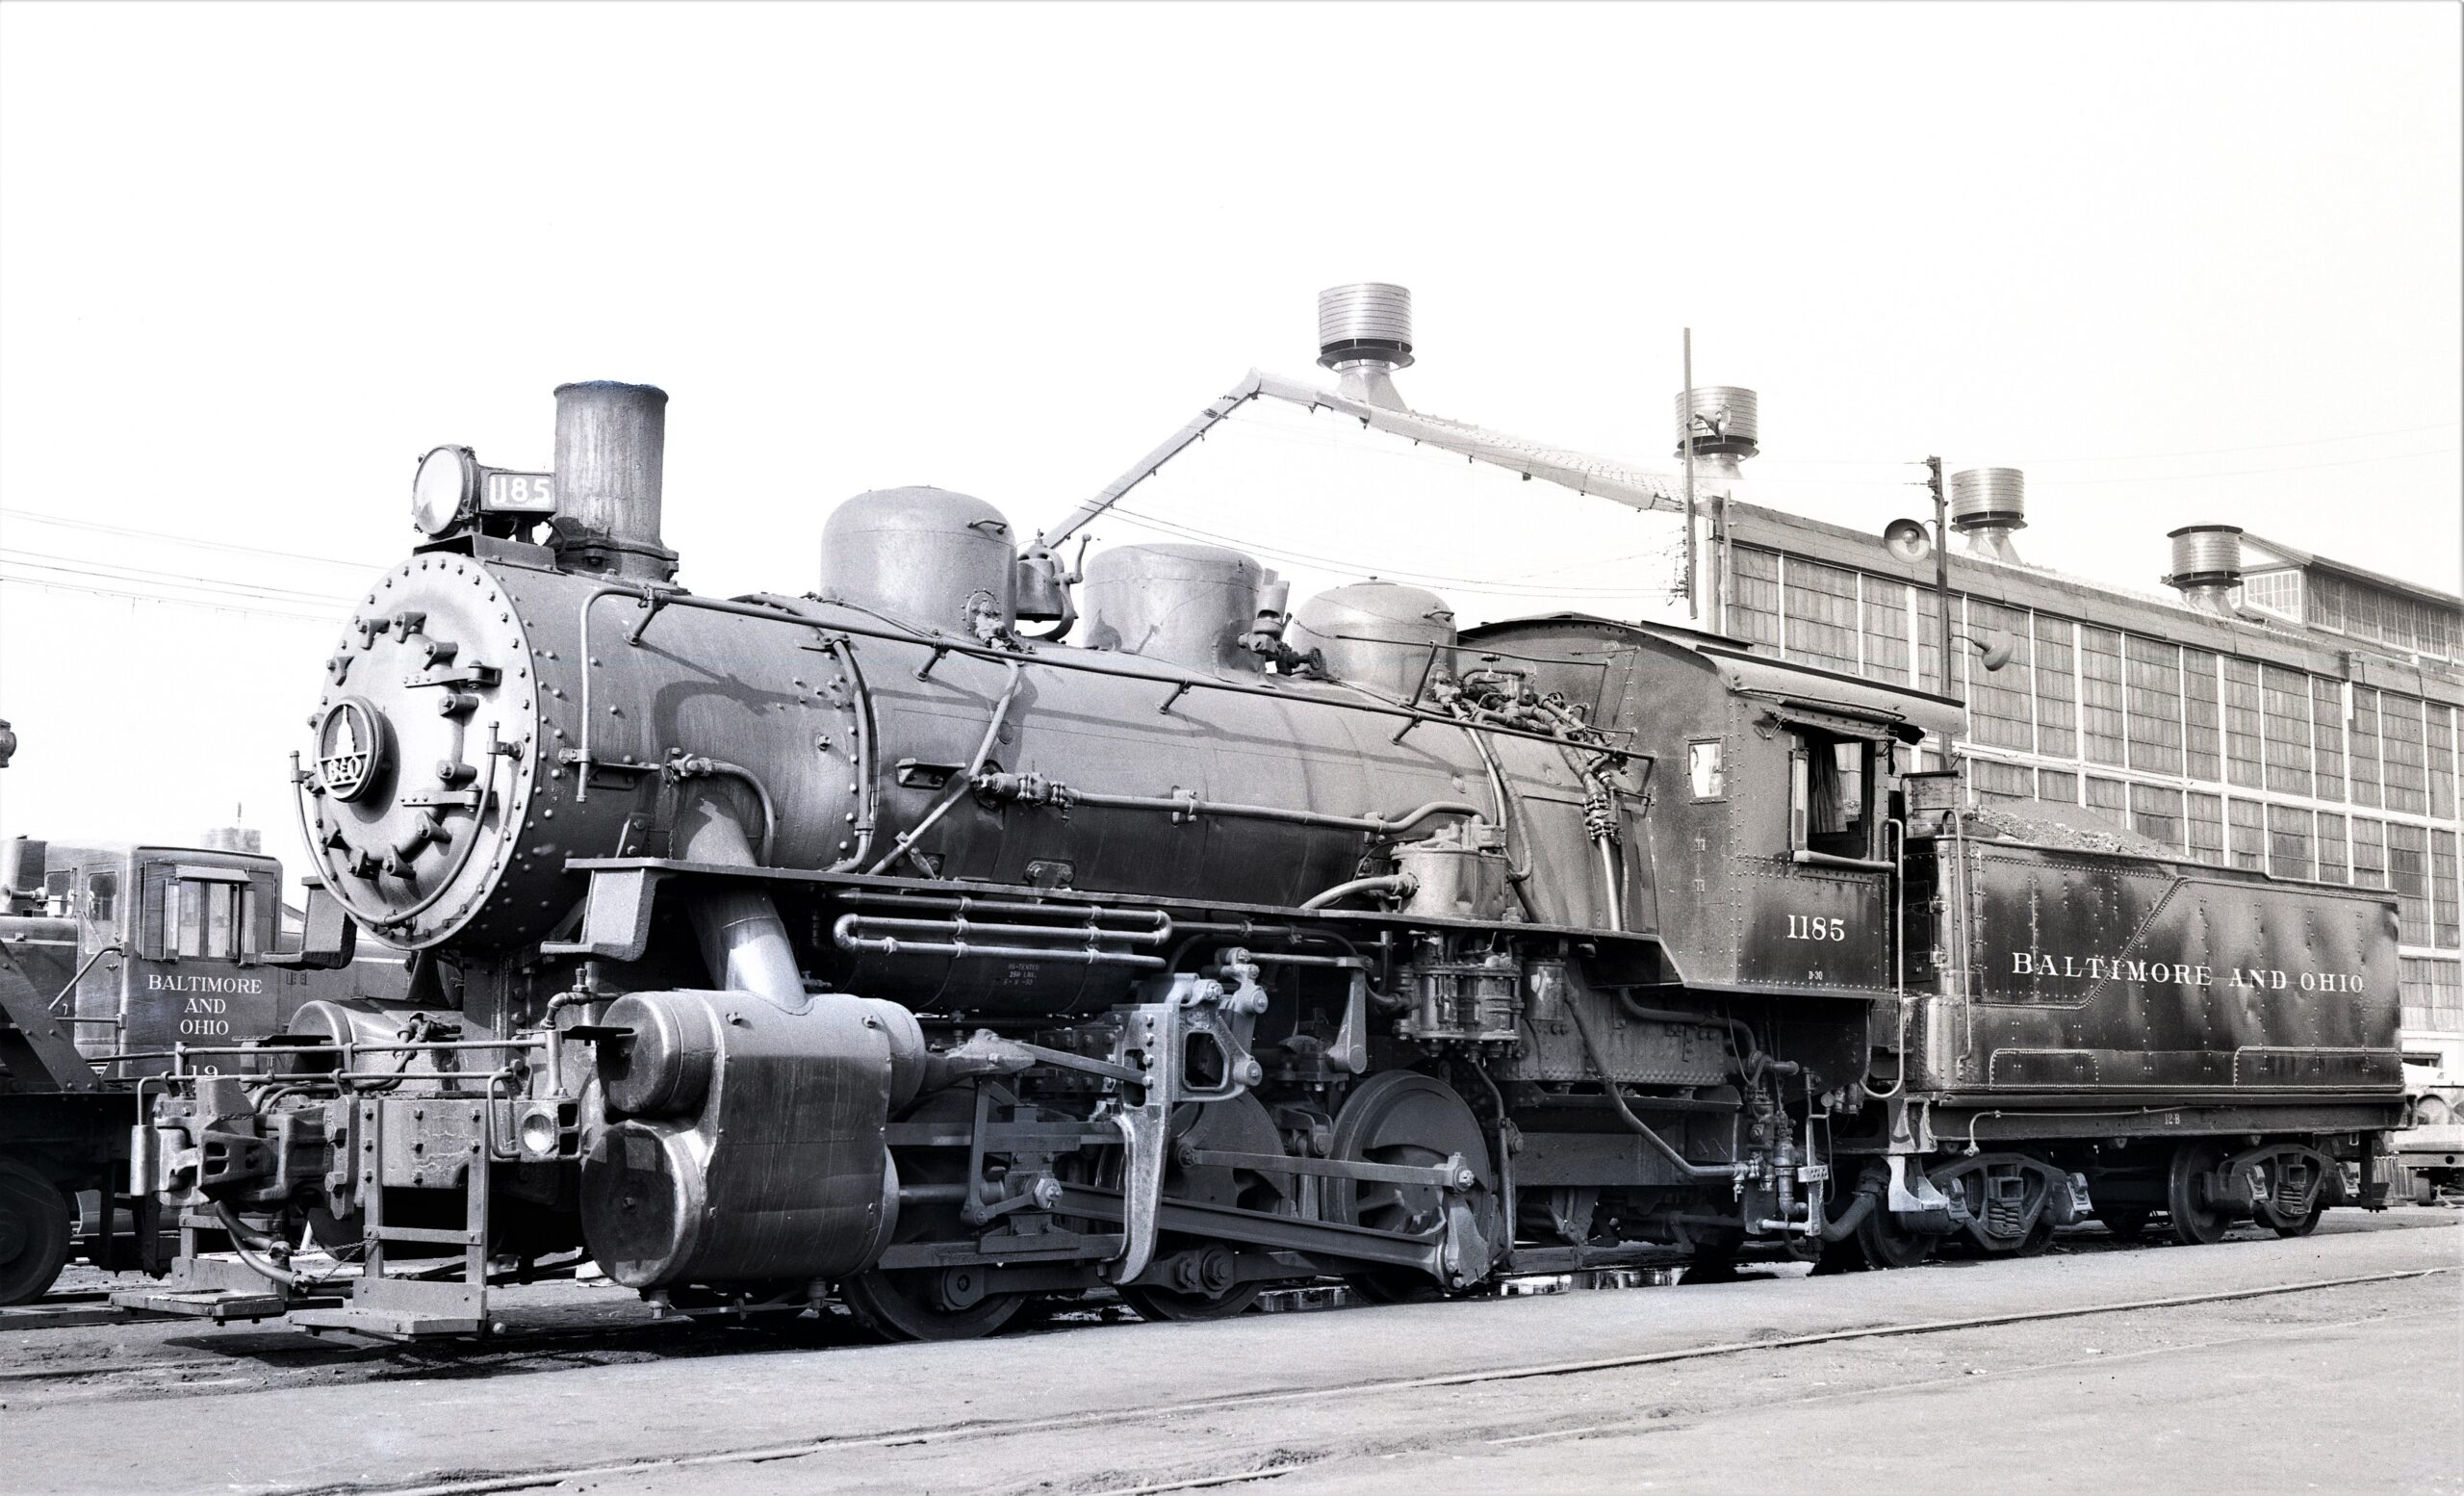 Baltimore and Ohio | Baltimore, Maryland | Class D-30 0-6-0 #1185 steam switcher locomotive | Mount Clare Shops | October 4, 1953 | R.L. Long photograph